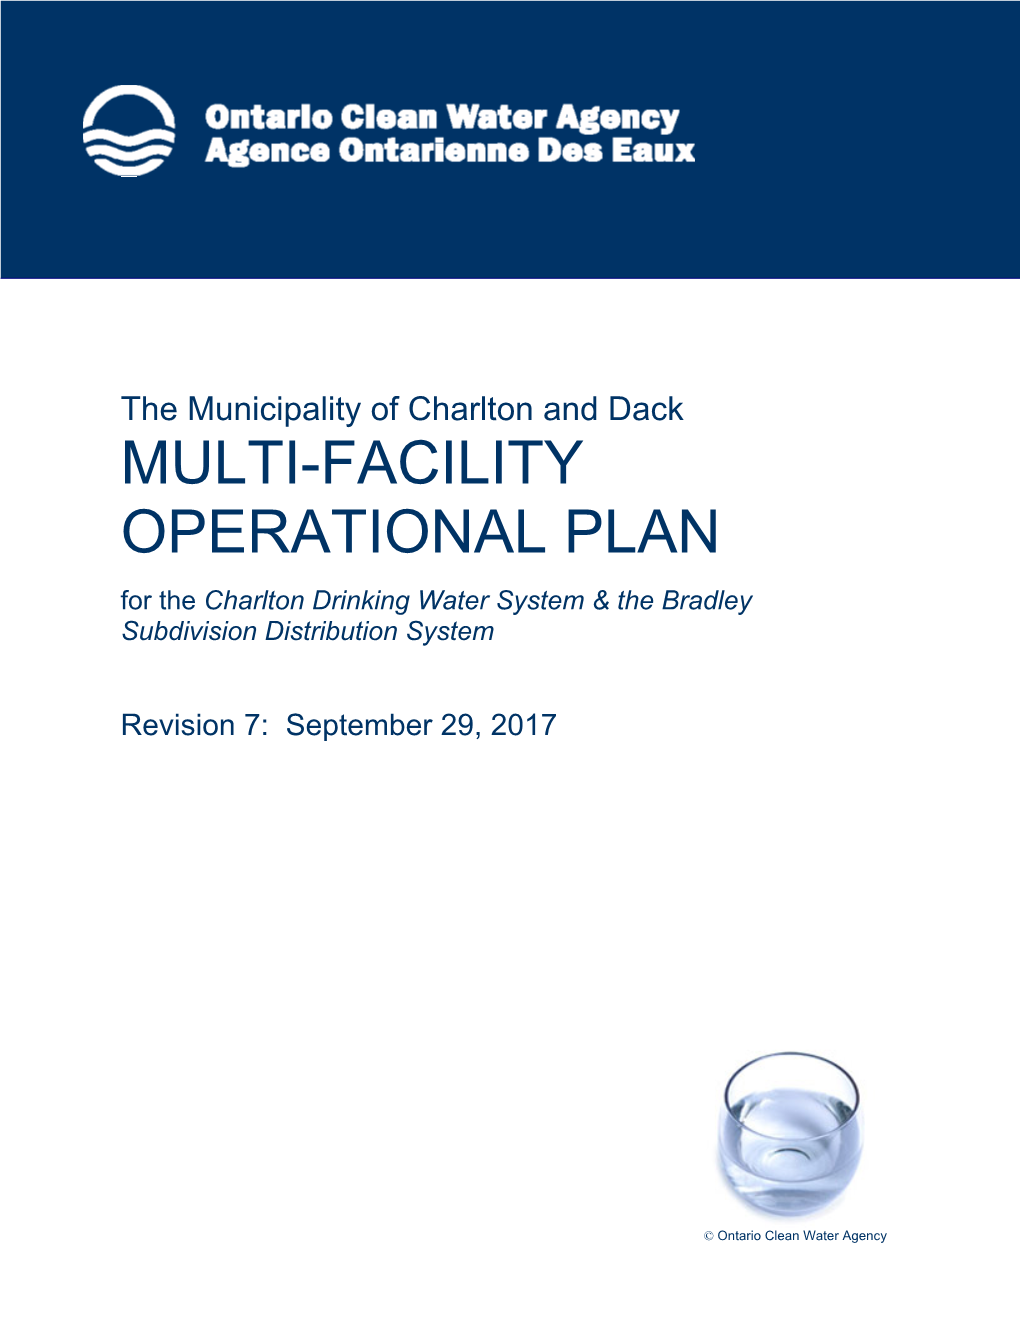 Operation Plan for the Charlton And